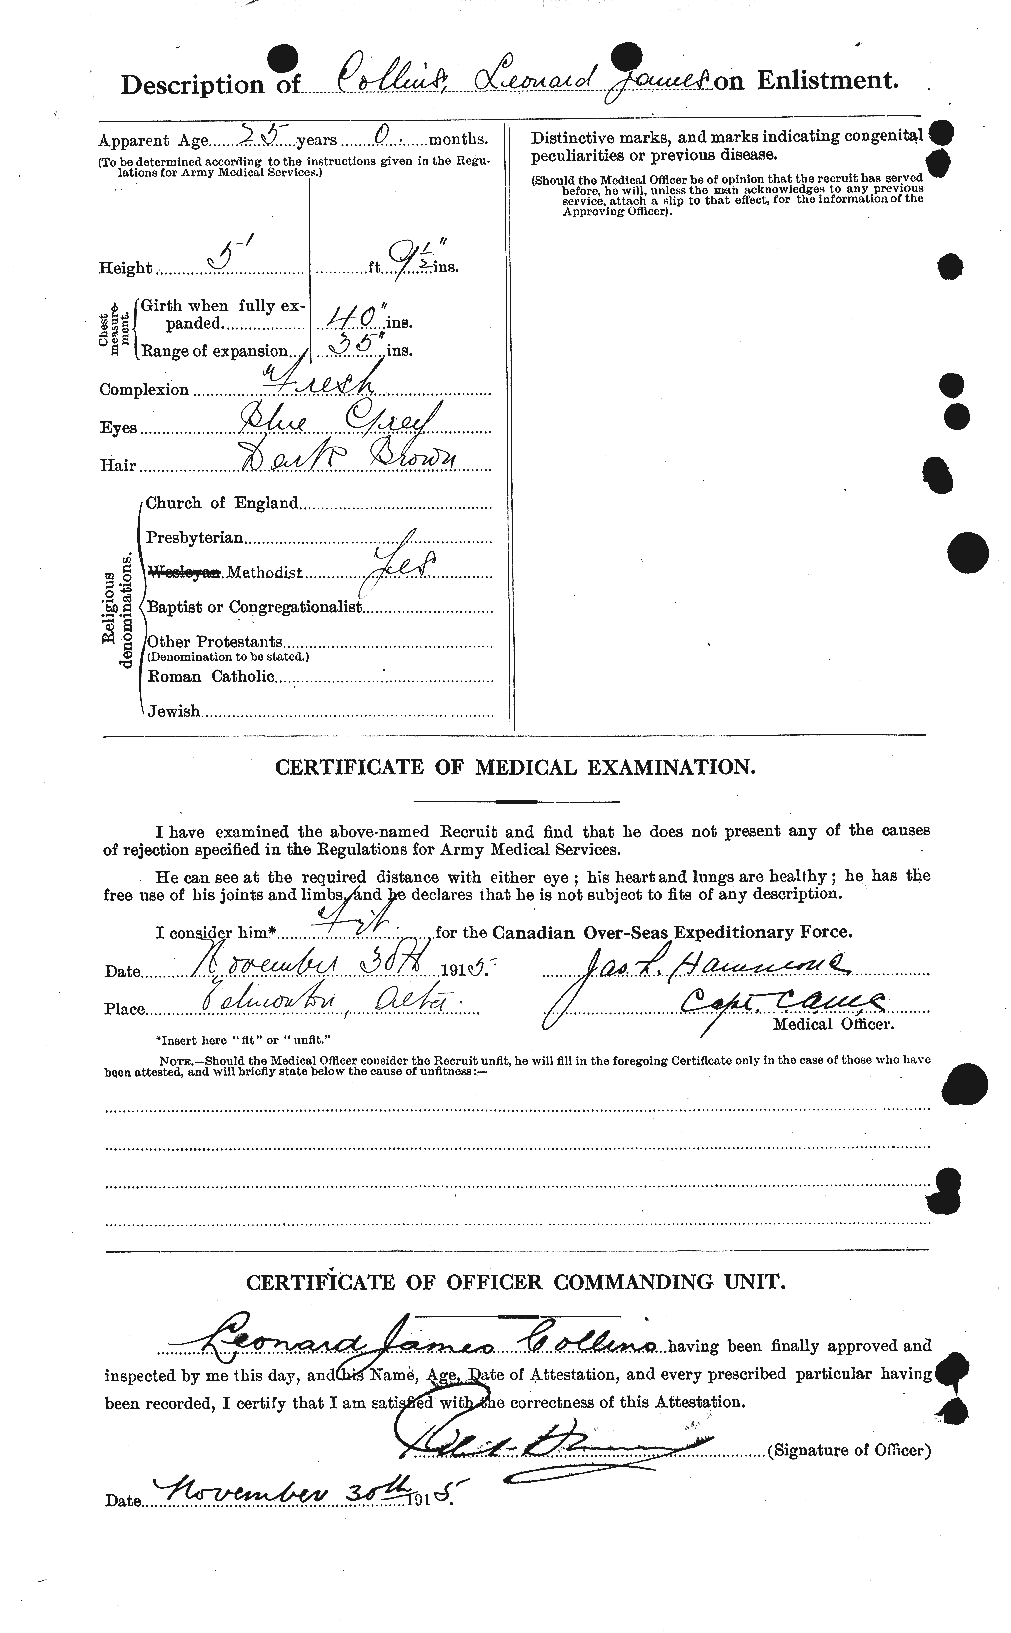 Personnel Records of the First World War - CEF 069498b